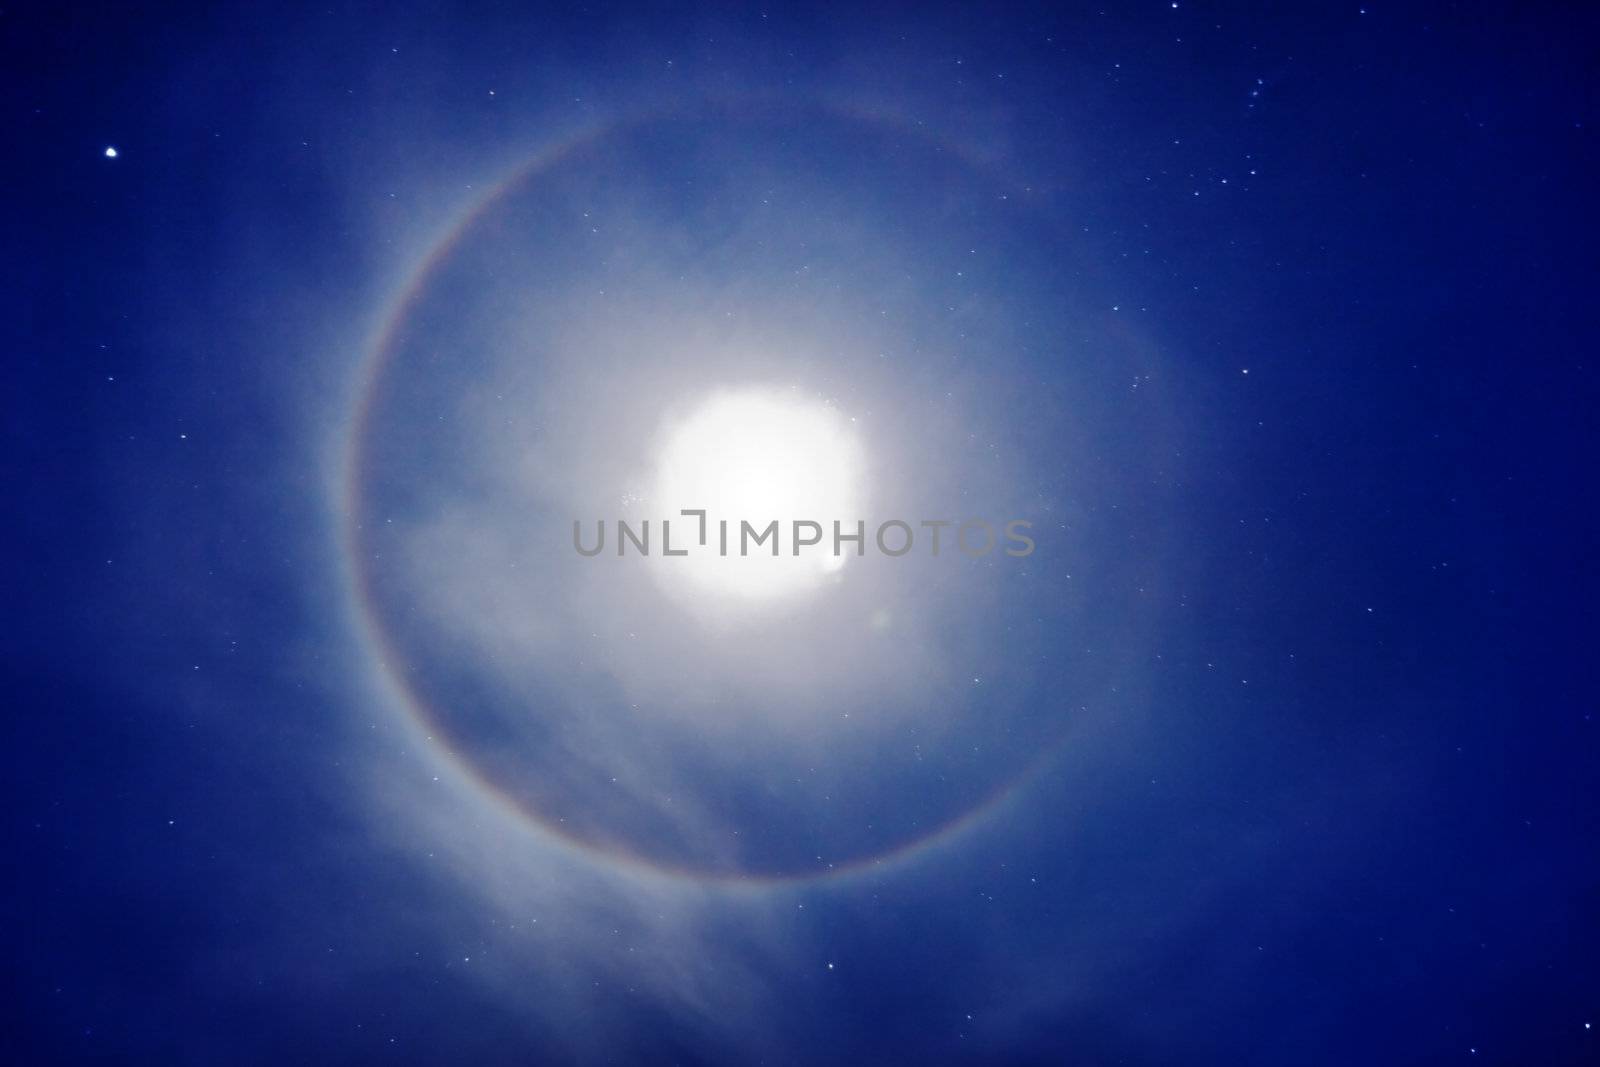 Halo around the moon - photo by pzaxe